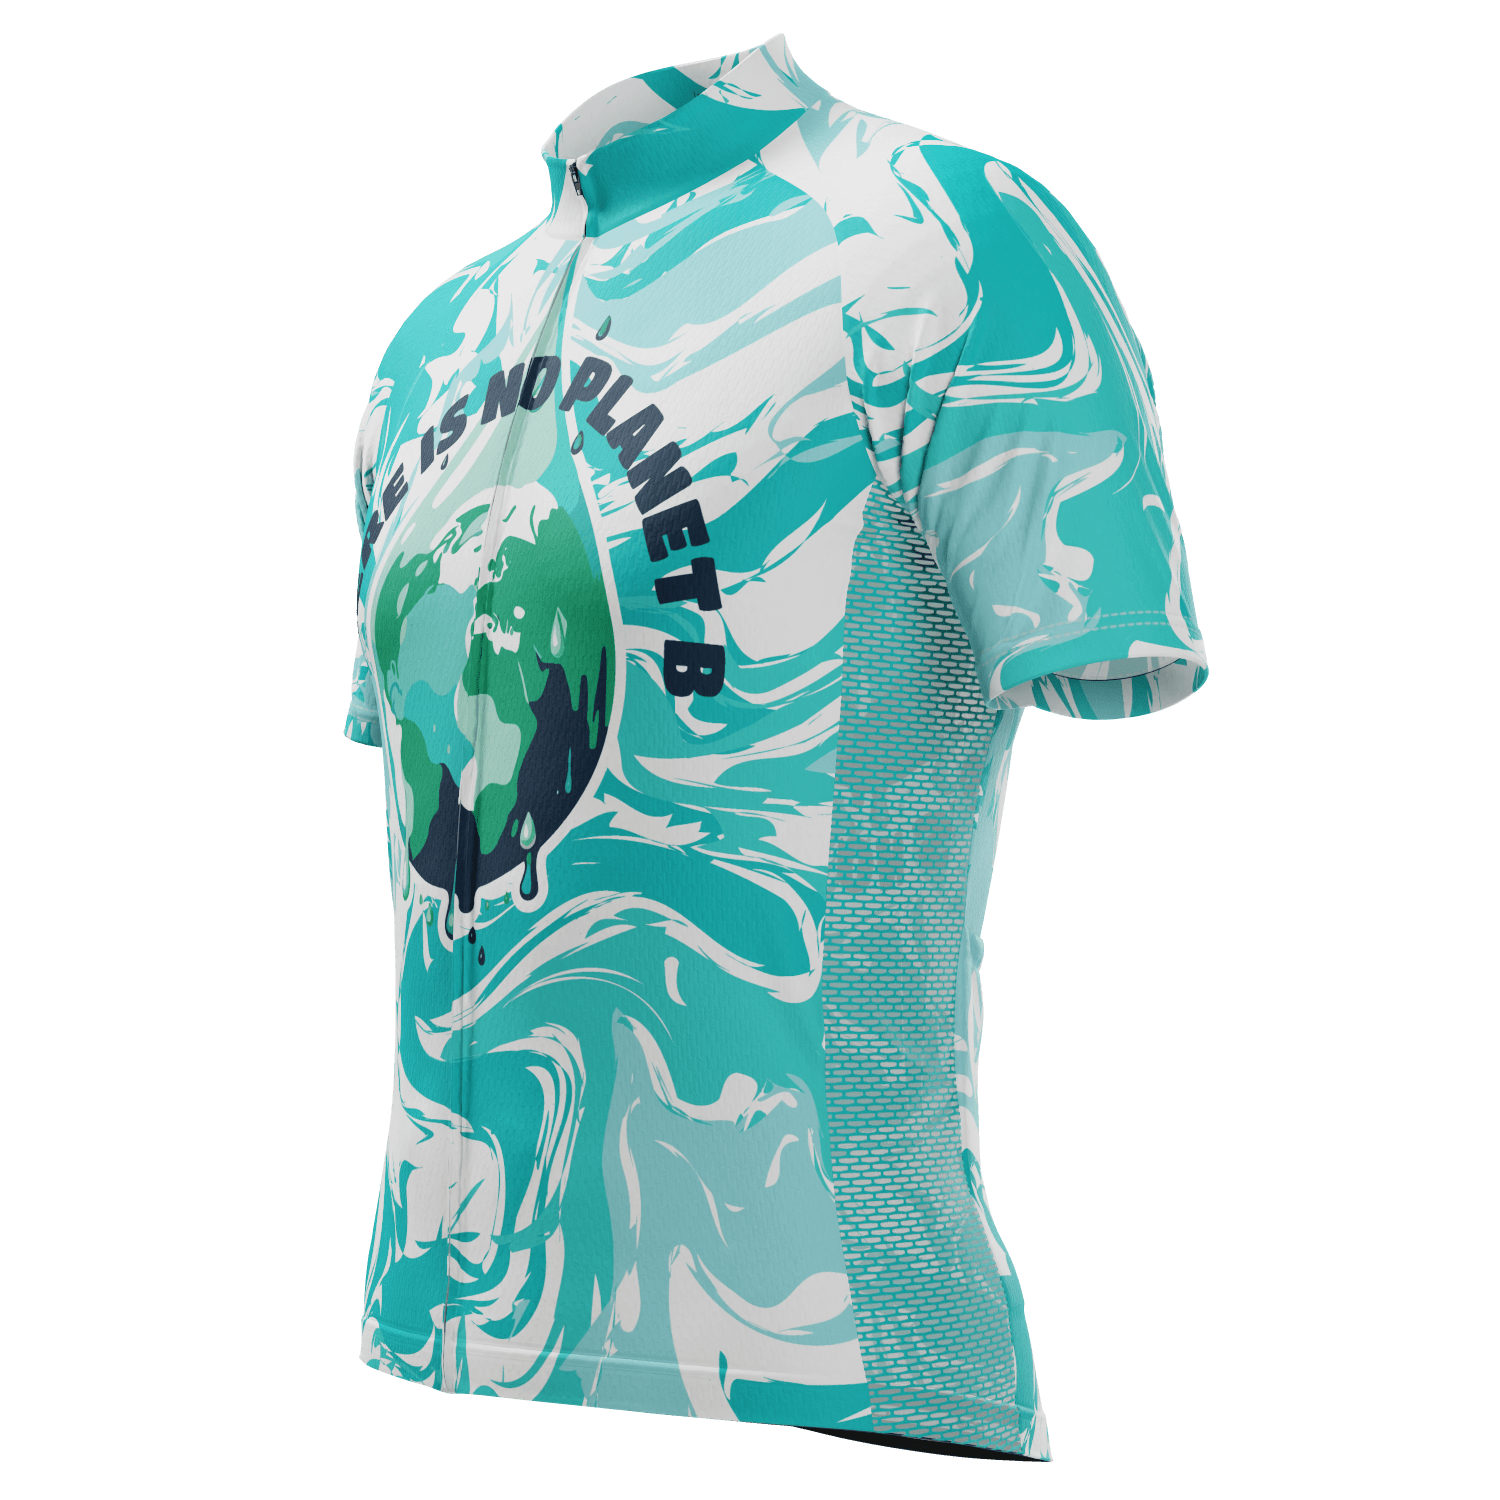 Men's There is No Planet B Short Sleeve Cycling Jersey